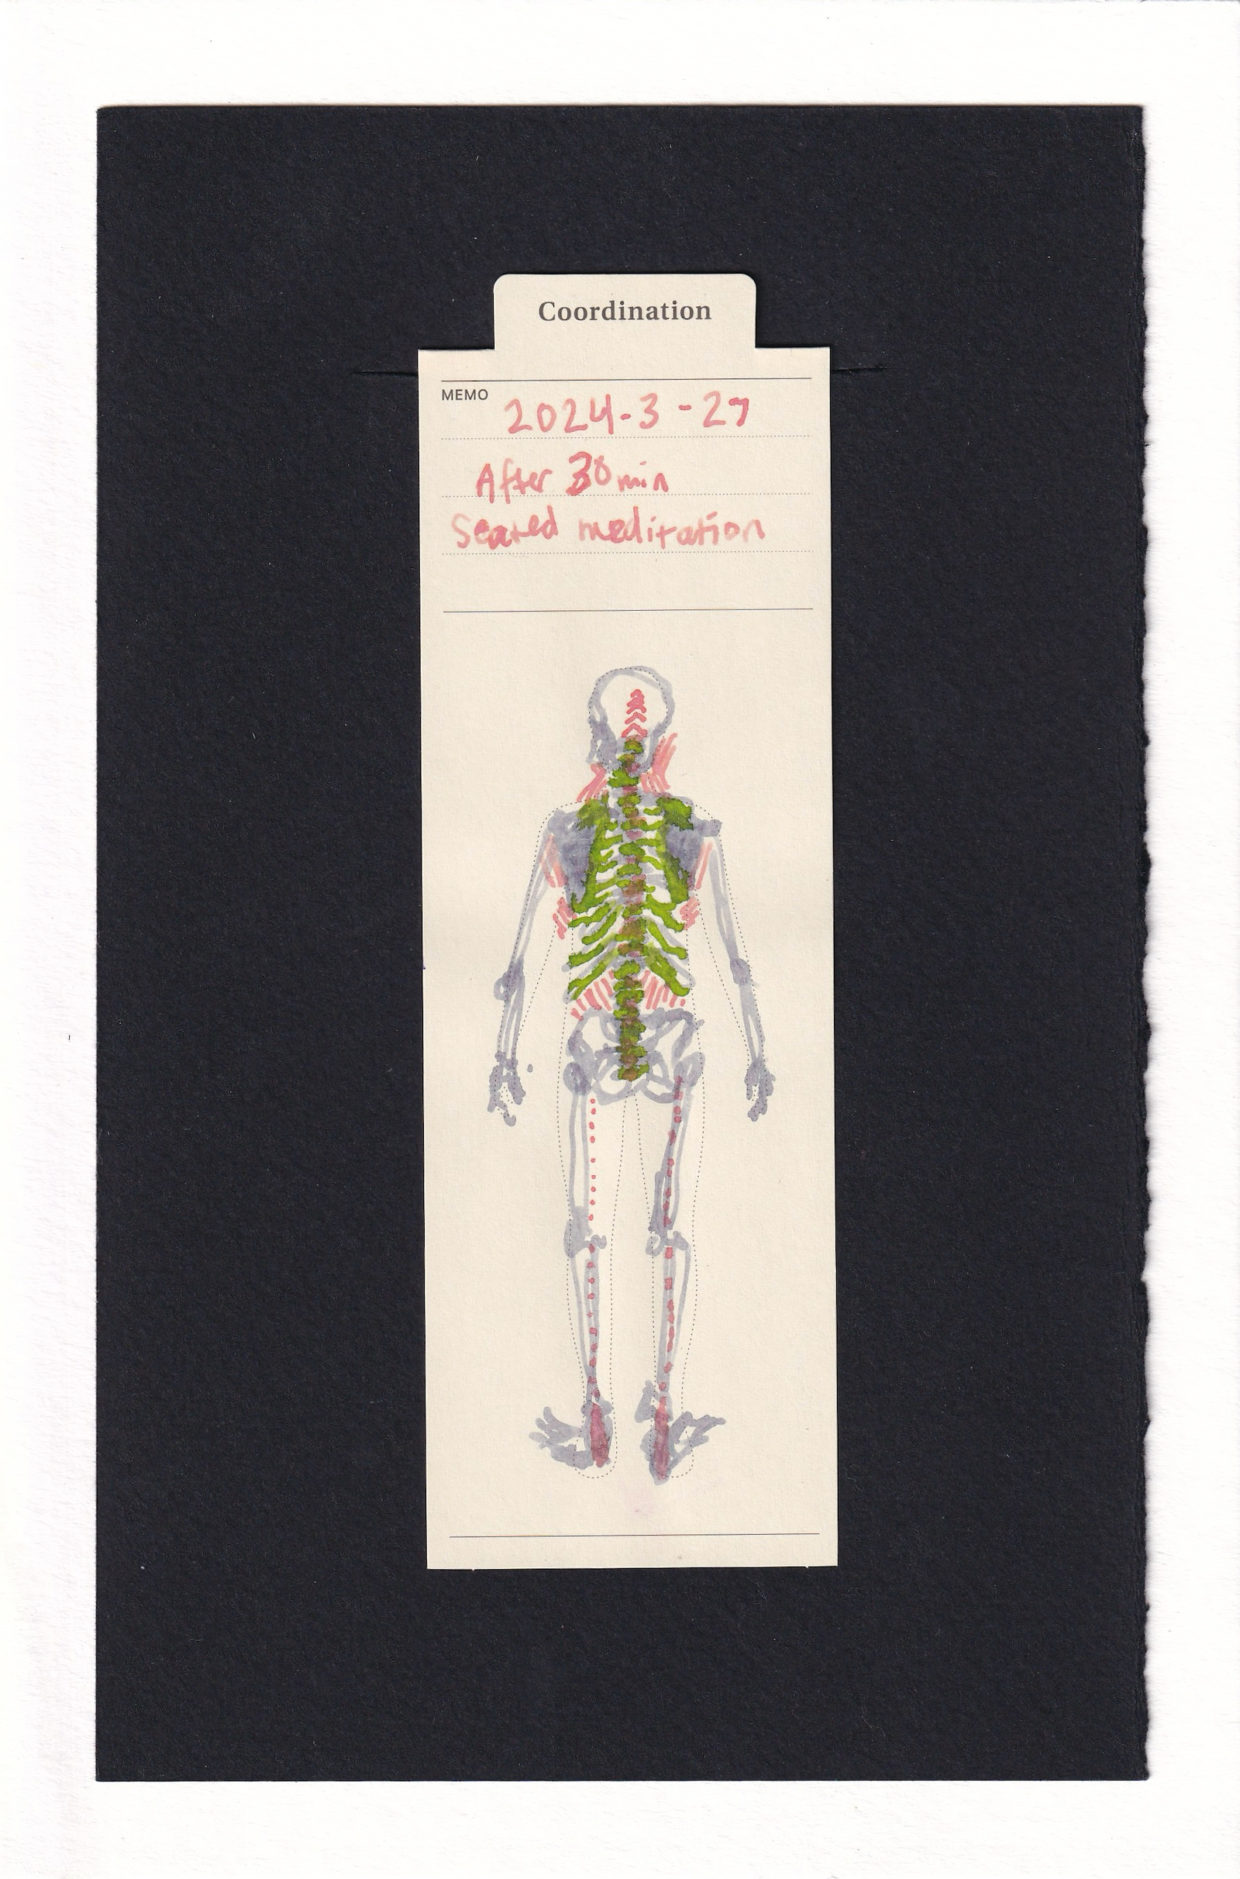 The rear view of a skeleton, drawn on to the printed outline of a human figure of a bookmark. Their spine, ribs, and shoulder blades are wrapped in bright lime green, and thinner lines of light bright orange fill the areas between the bones, almost like radiating earthquake lines. Down the back of the legs, the same light and bright orange dots hamstring-like soreness. The quake lines also extend angularly up into the back of the skull.